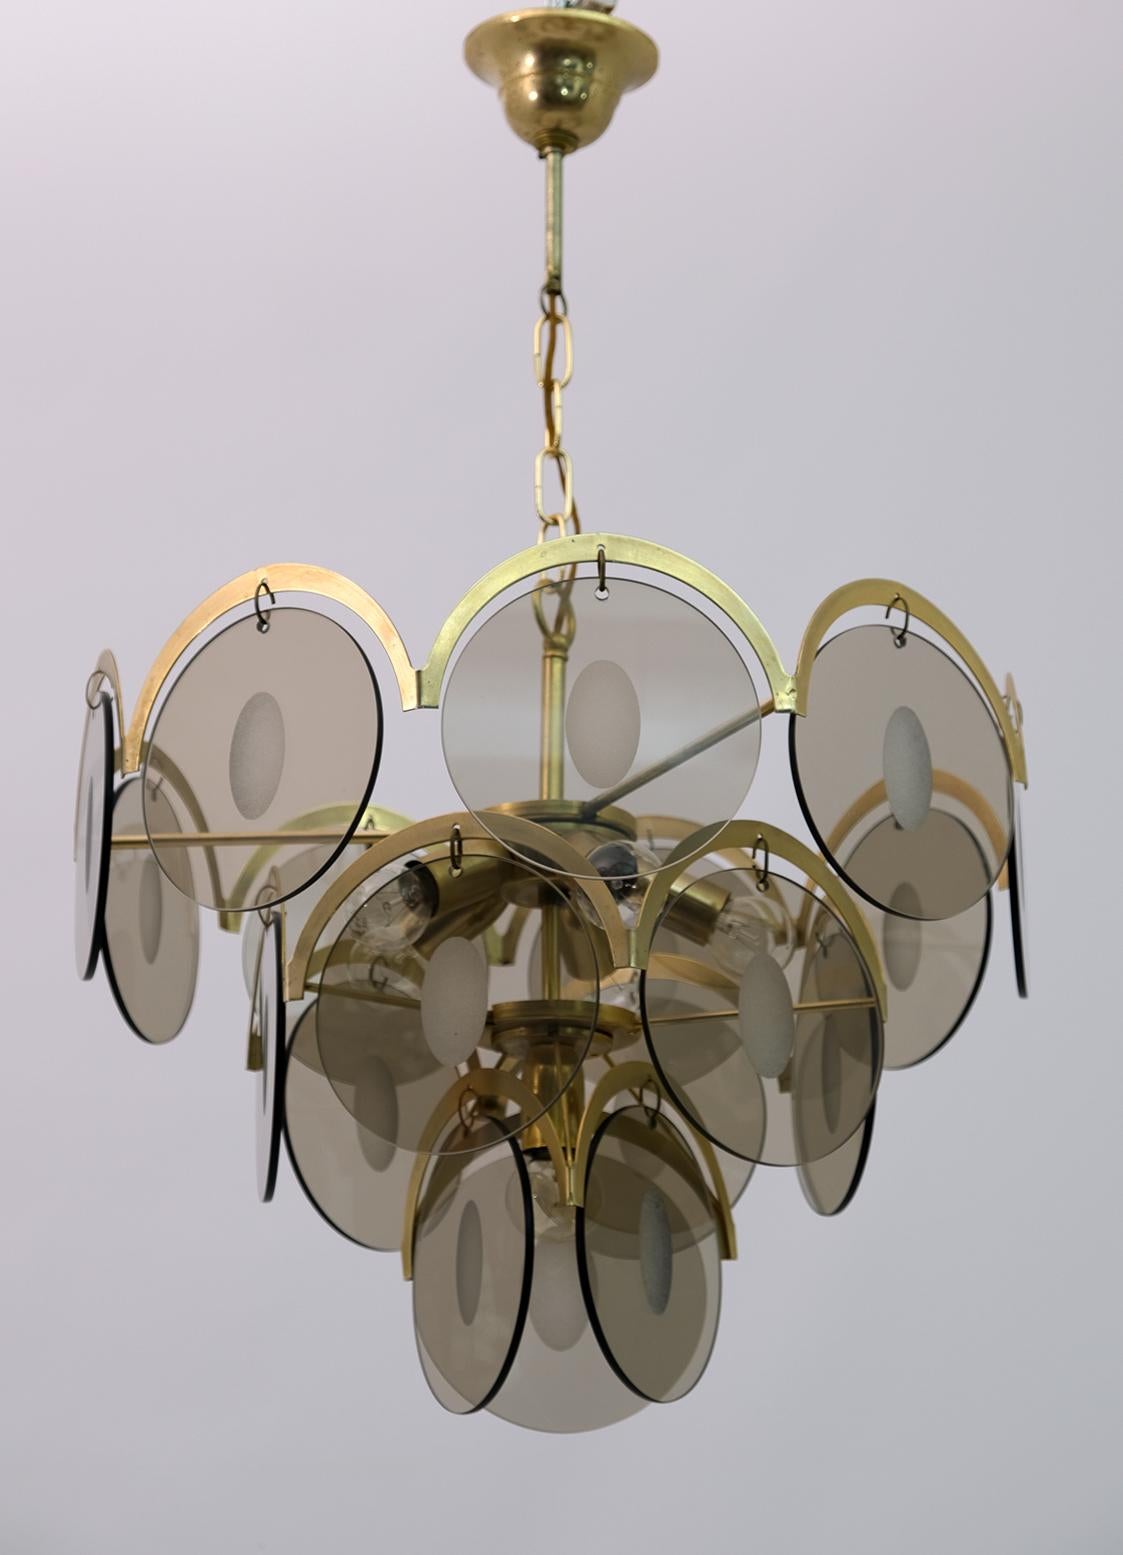 This 6-light chandelier, golden metal structure with 18 discs with a diameter of 14.5 cm, the discs were made of smoked bronzed glass and central grinding.